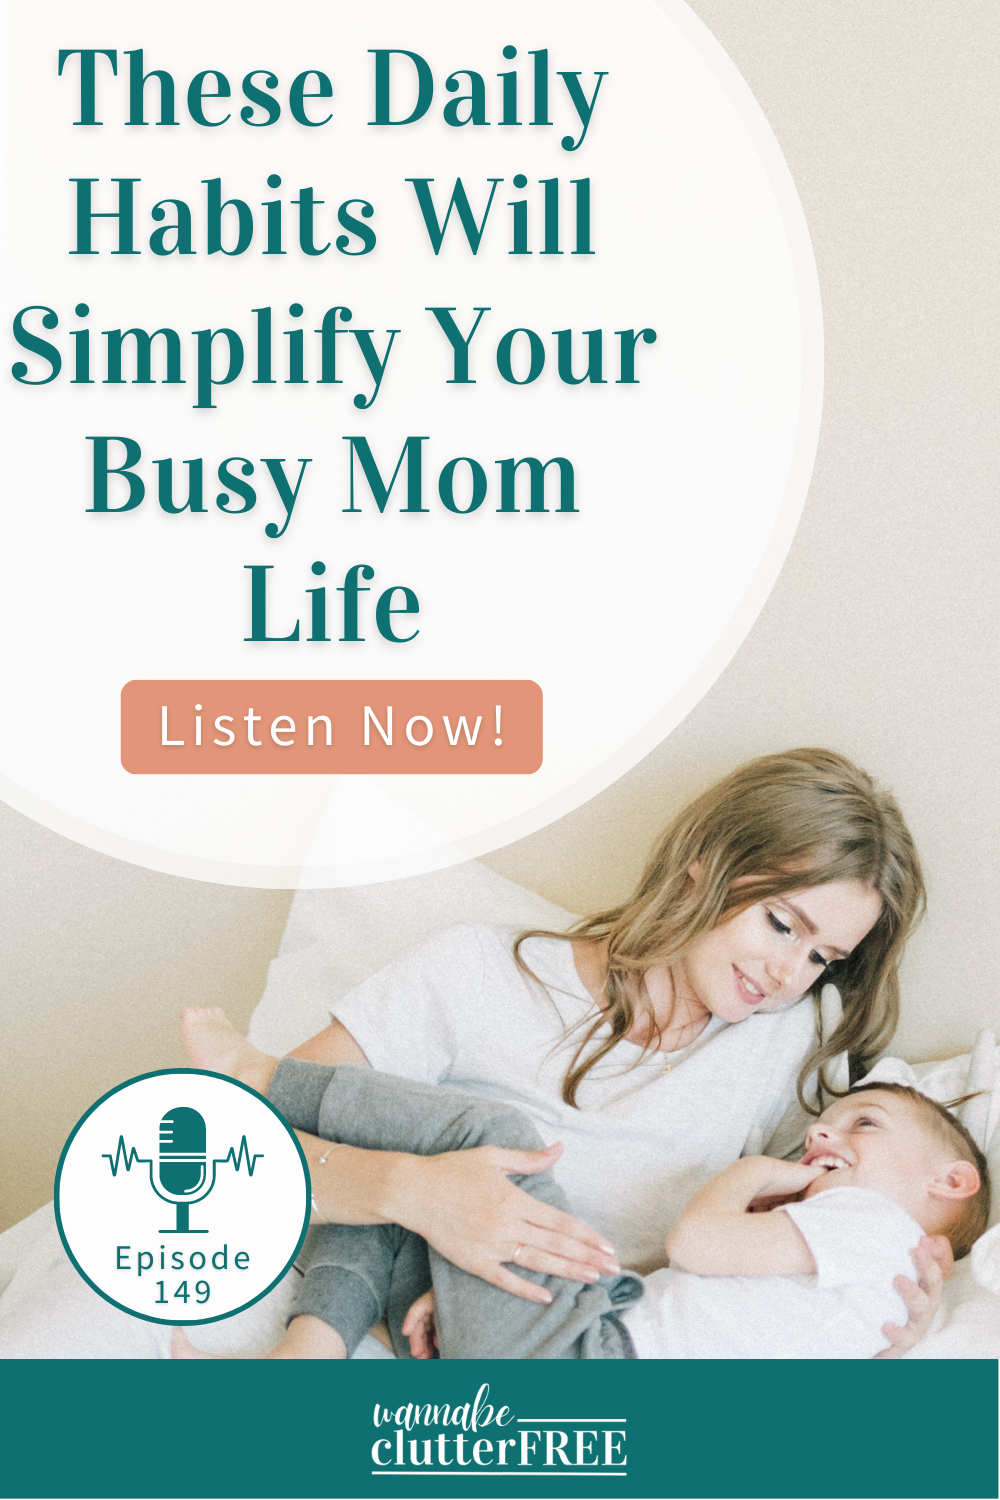 These Daily Habits will Simplify Your Busy Mom Life